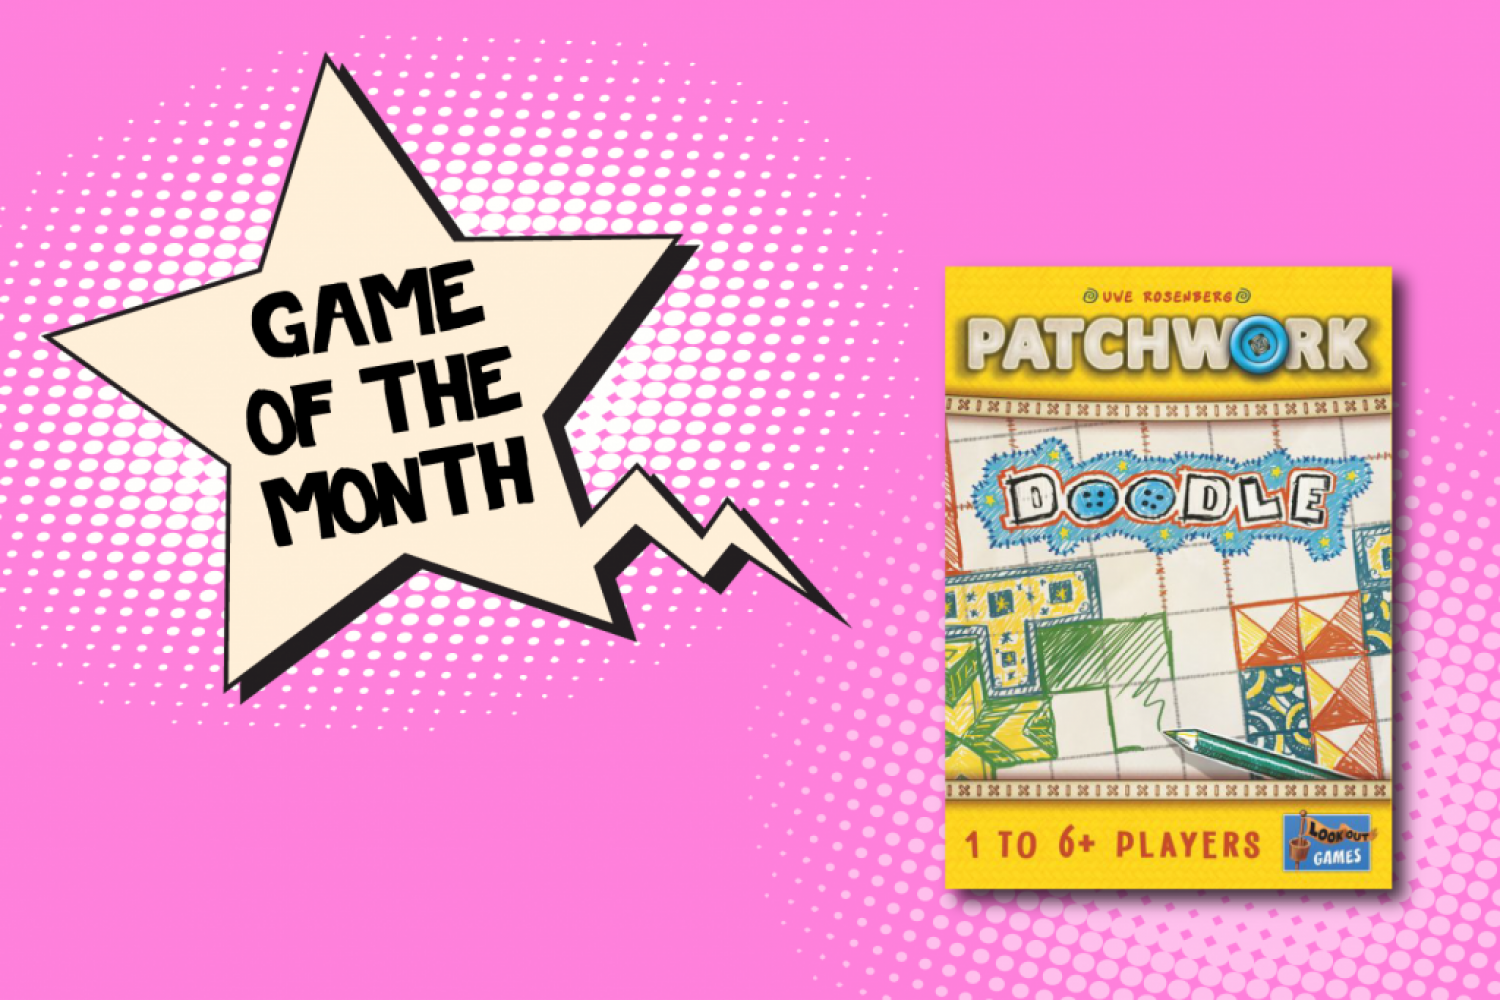 Game-of-the-Month-Patchwork-Doodle